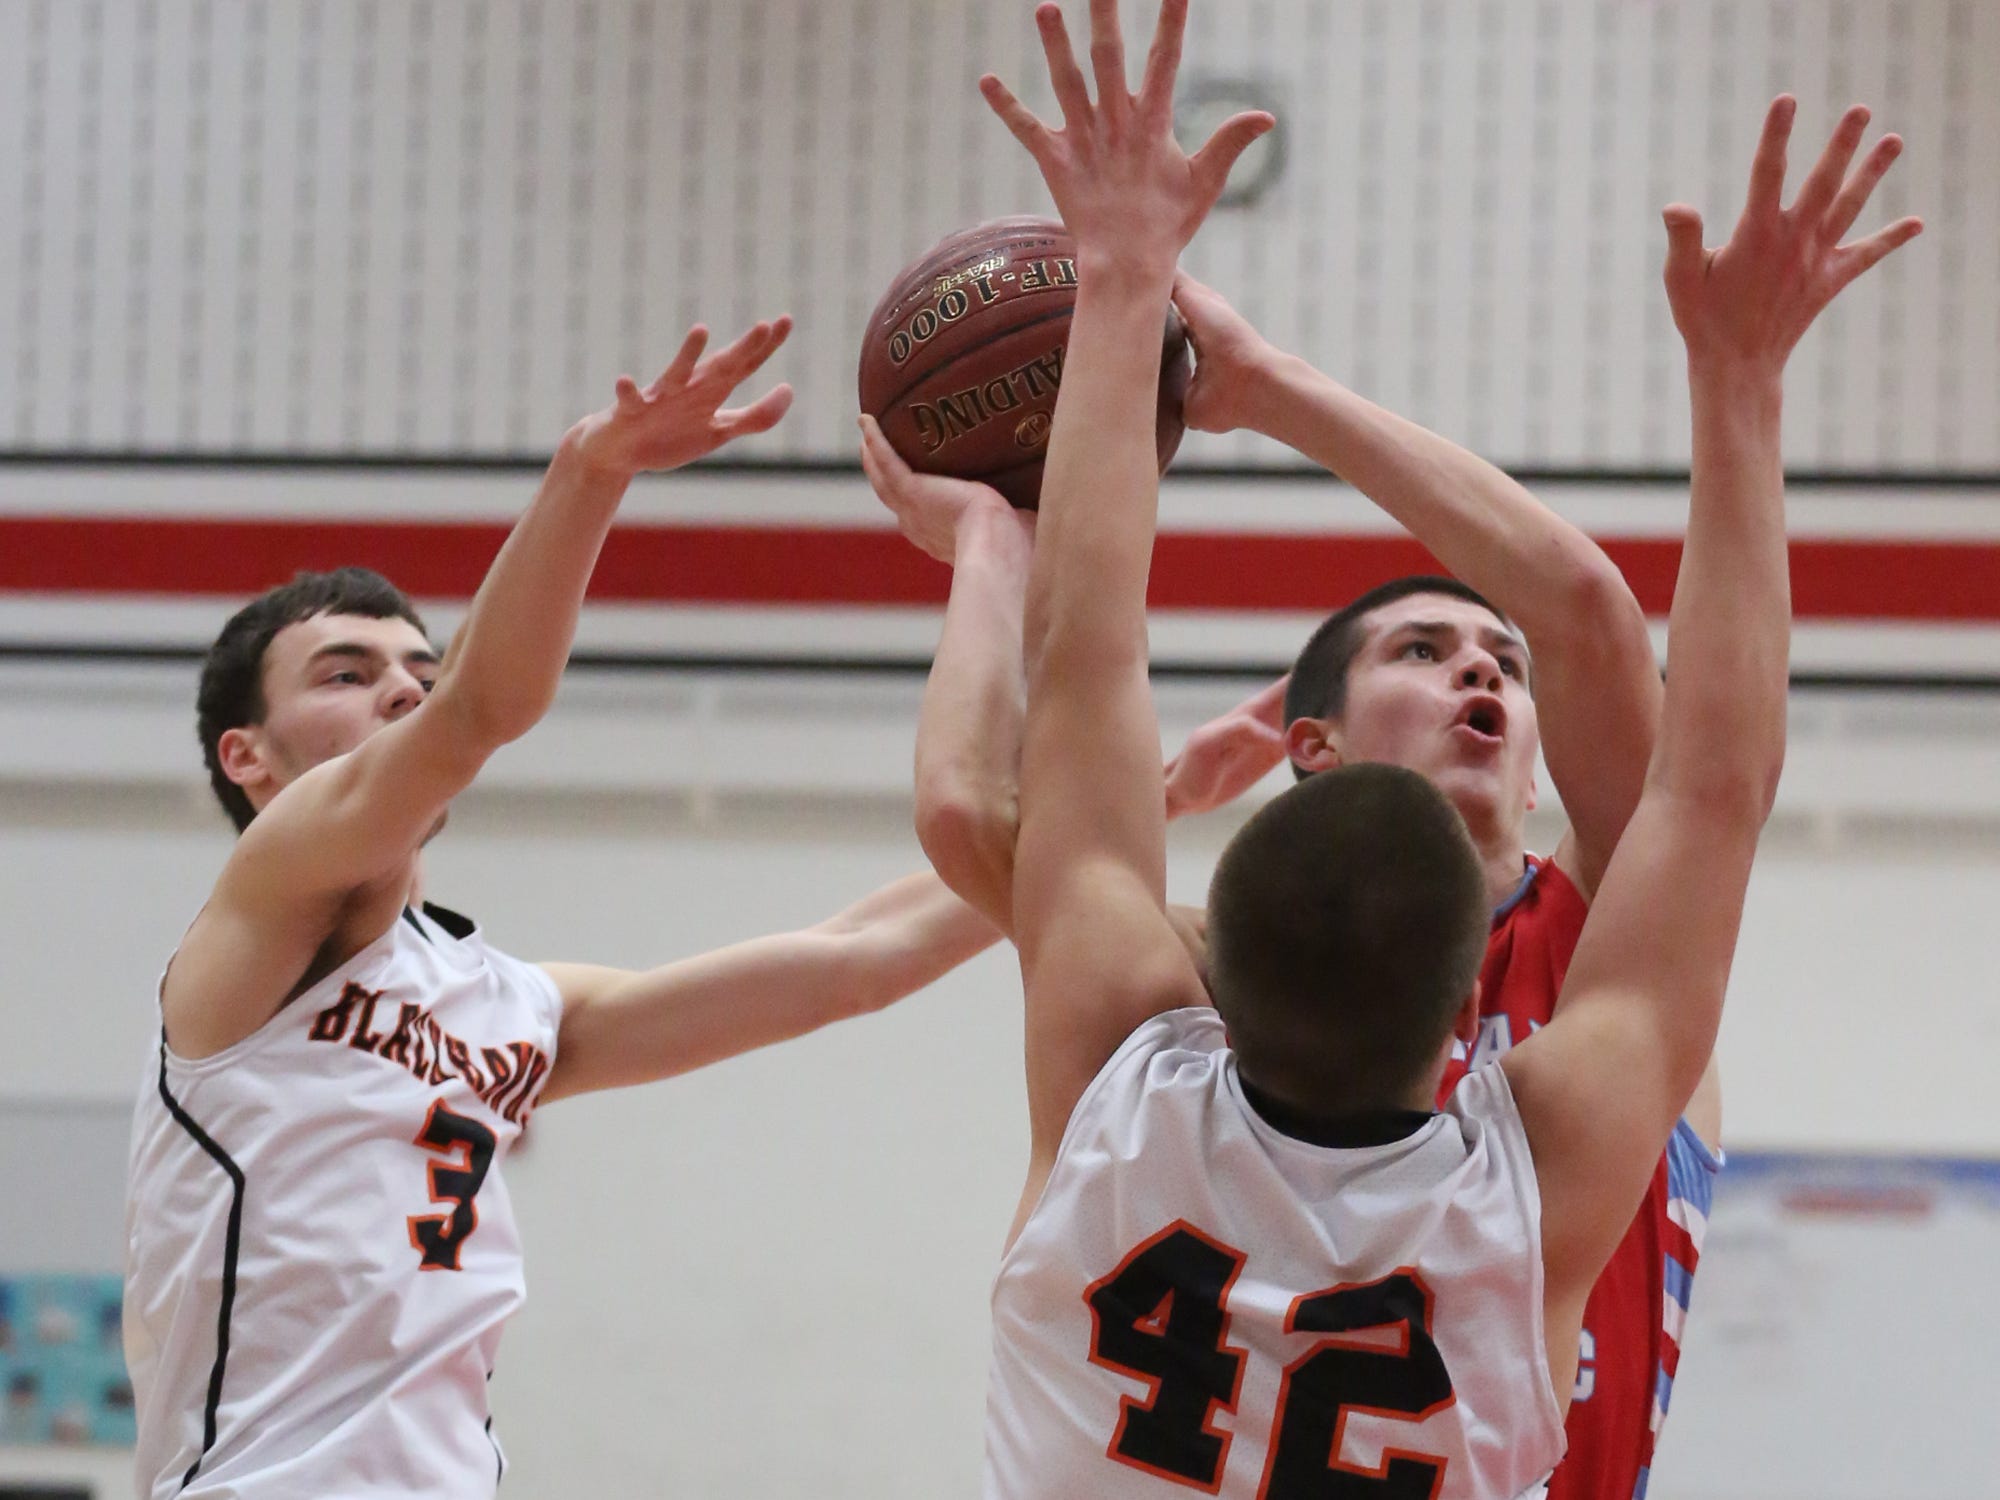 Newman Catholic's Jake Gajewski goes up for shot between Port Edwards' defenders Jake Schraeder, left, and Jared Joslin as the Cardinals lost to the Blackhawks in a WIAA Division 5 sectional semifinal at Wausau East Thursday.